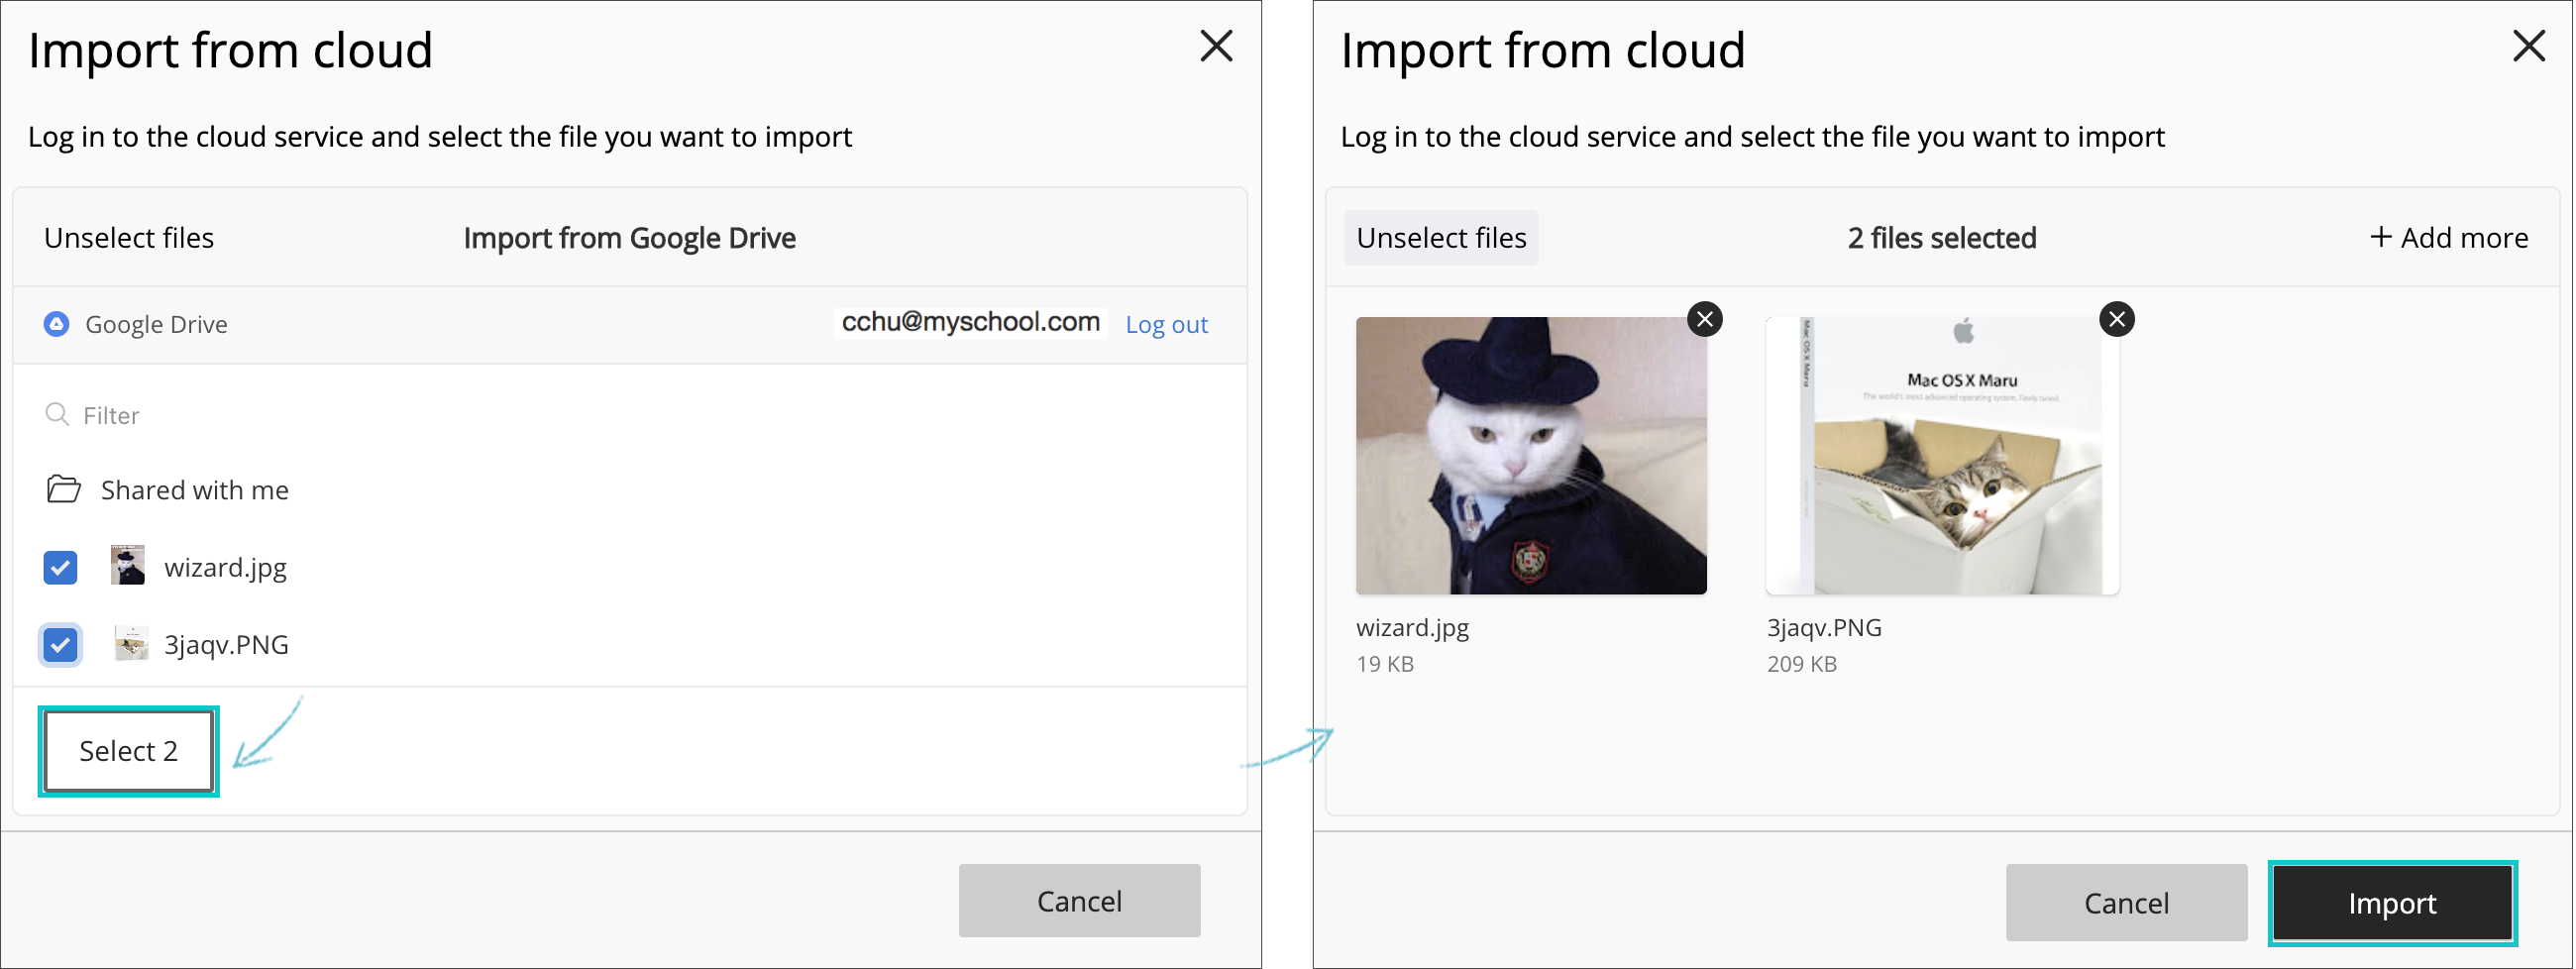 Learn Ultra import files using the Cloud Storage Service 